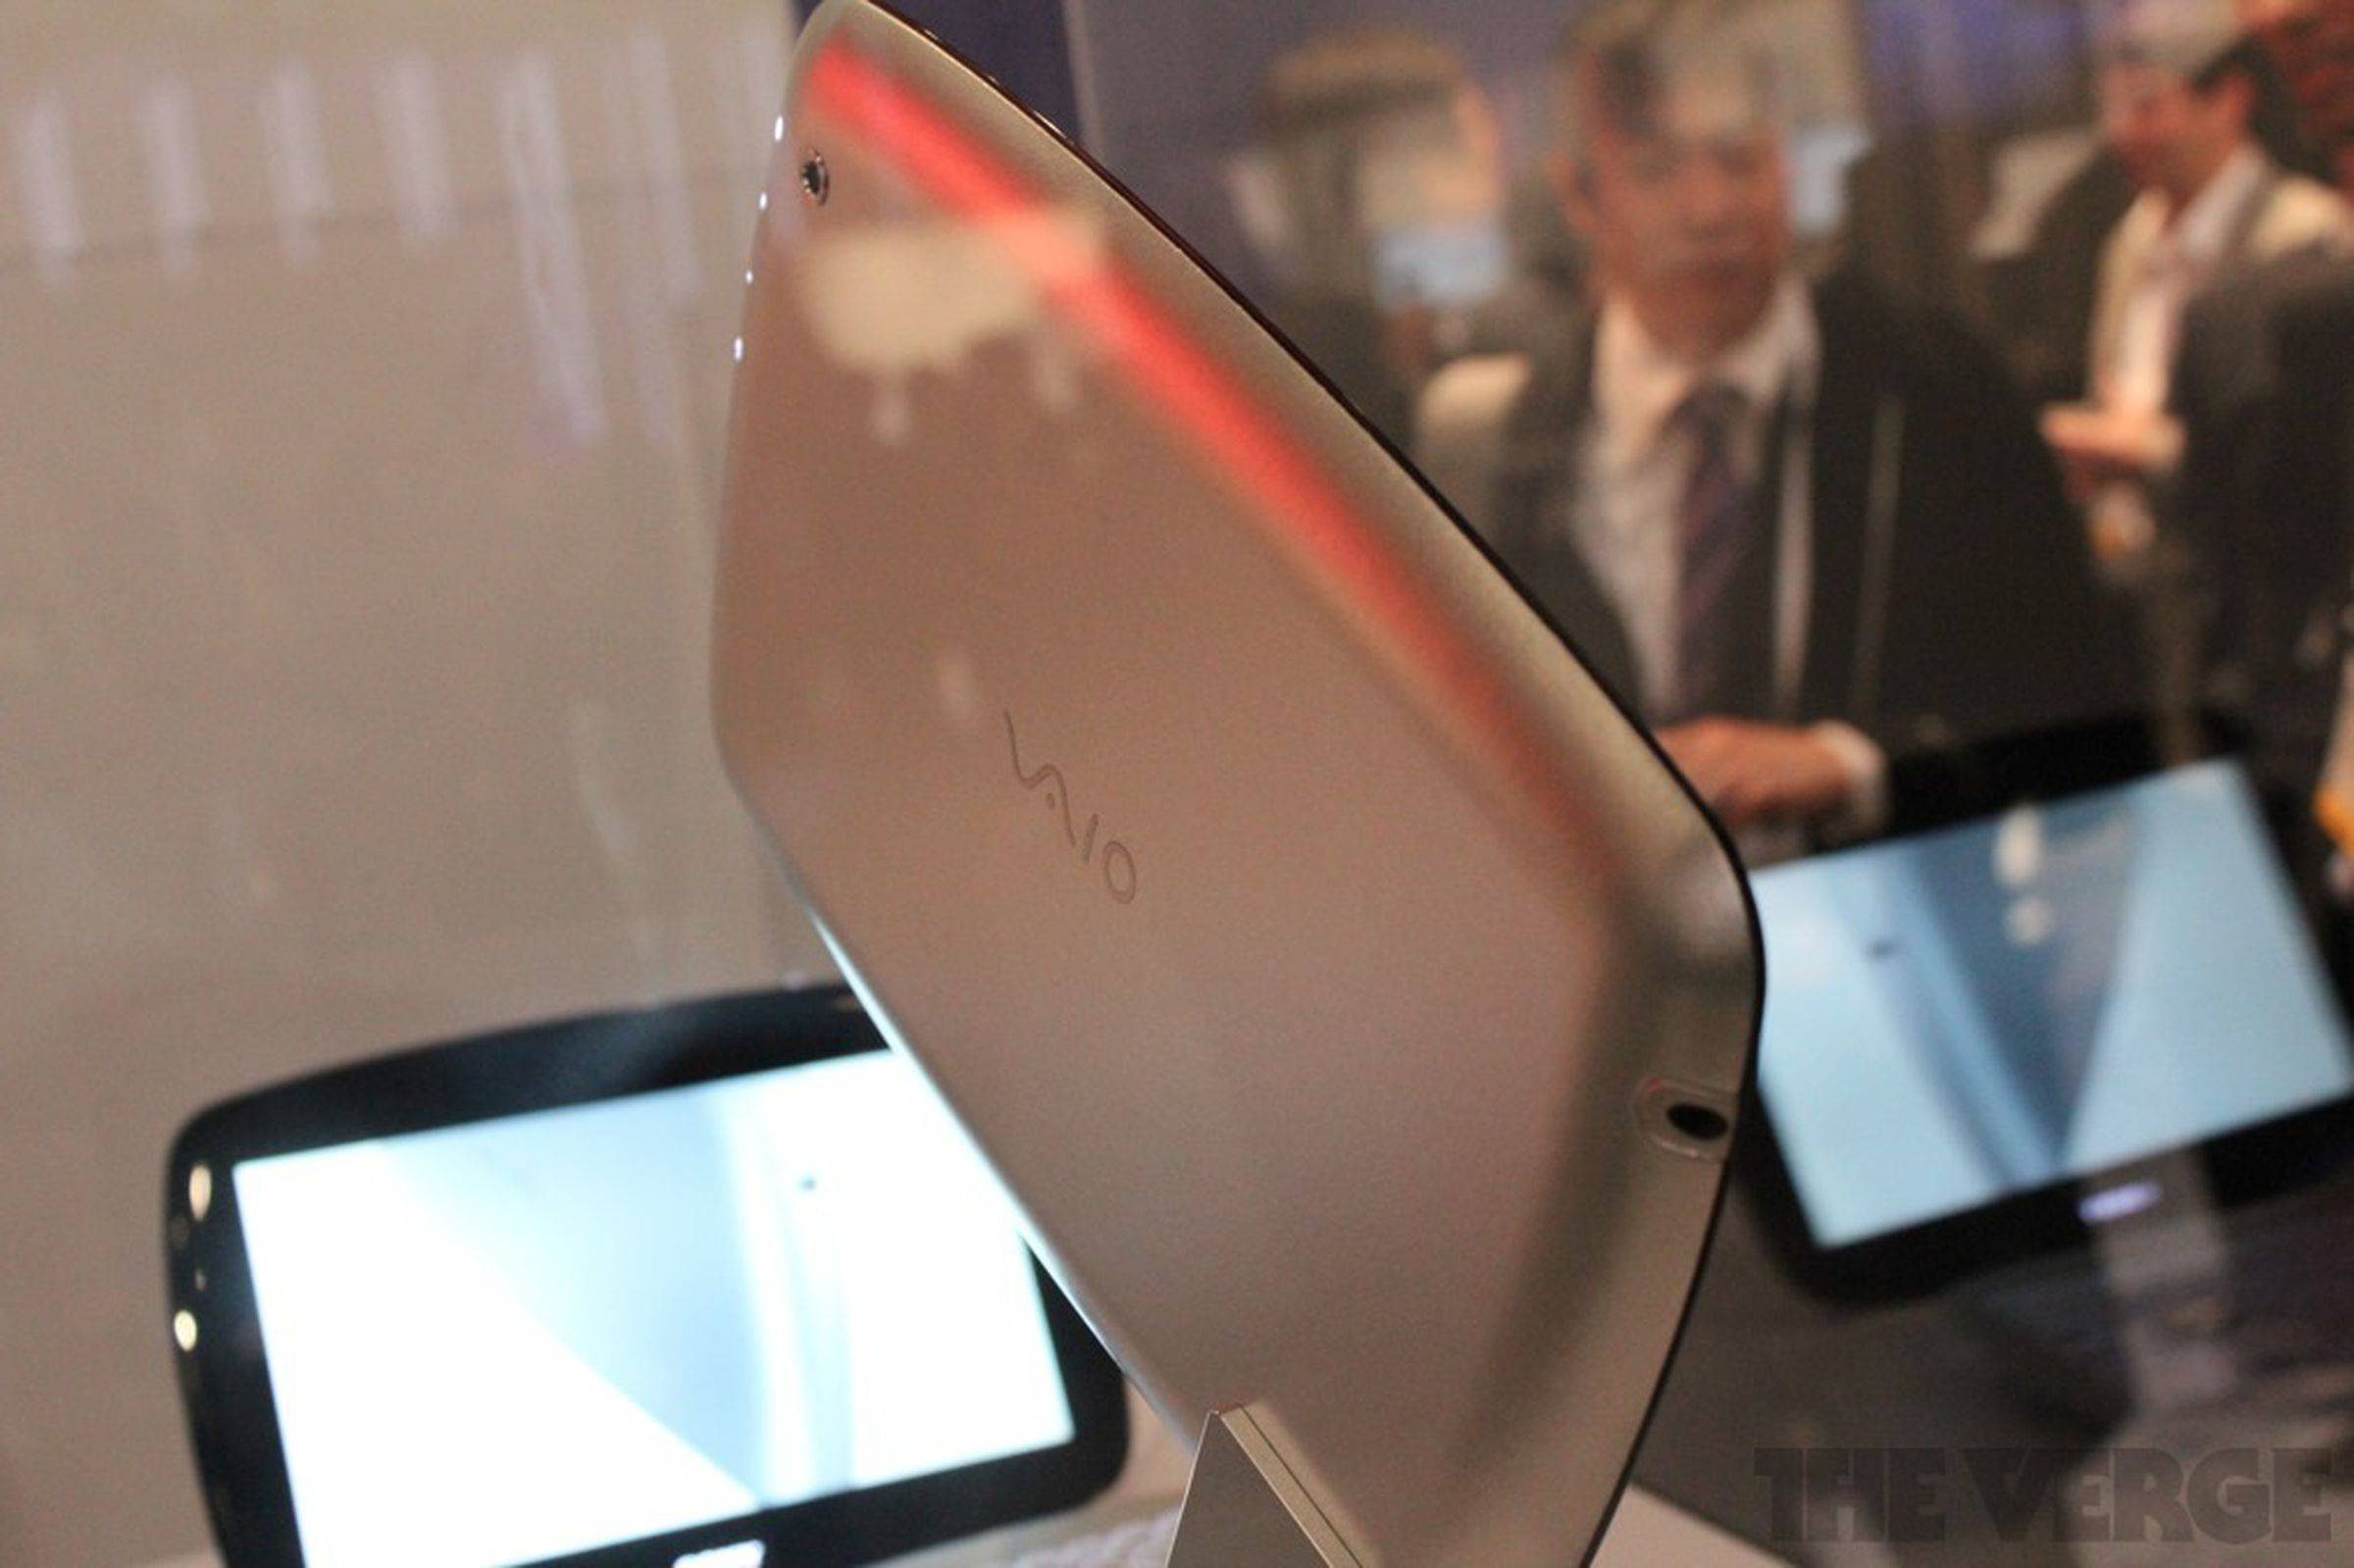 Sony tablet prototype with backlit keyboard photos